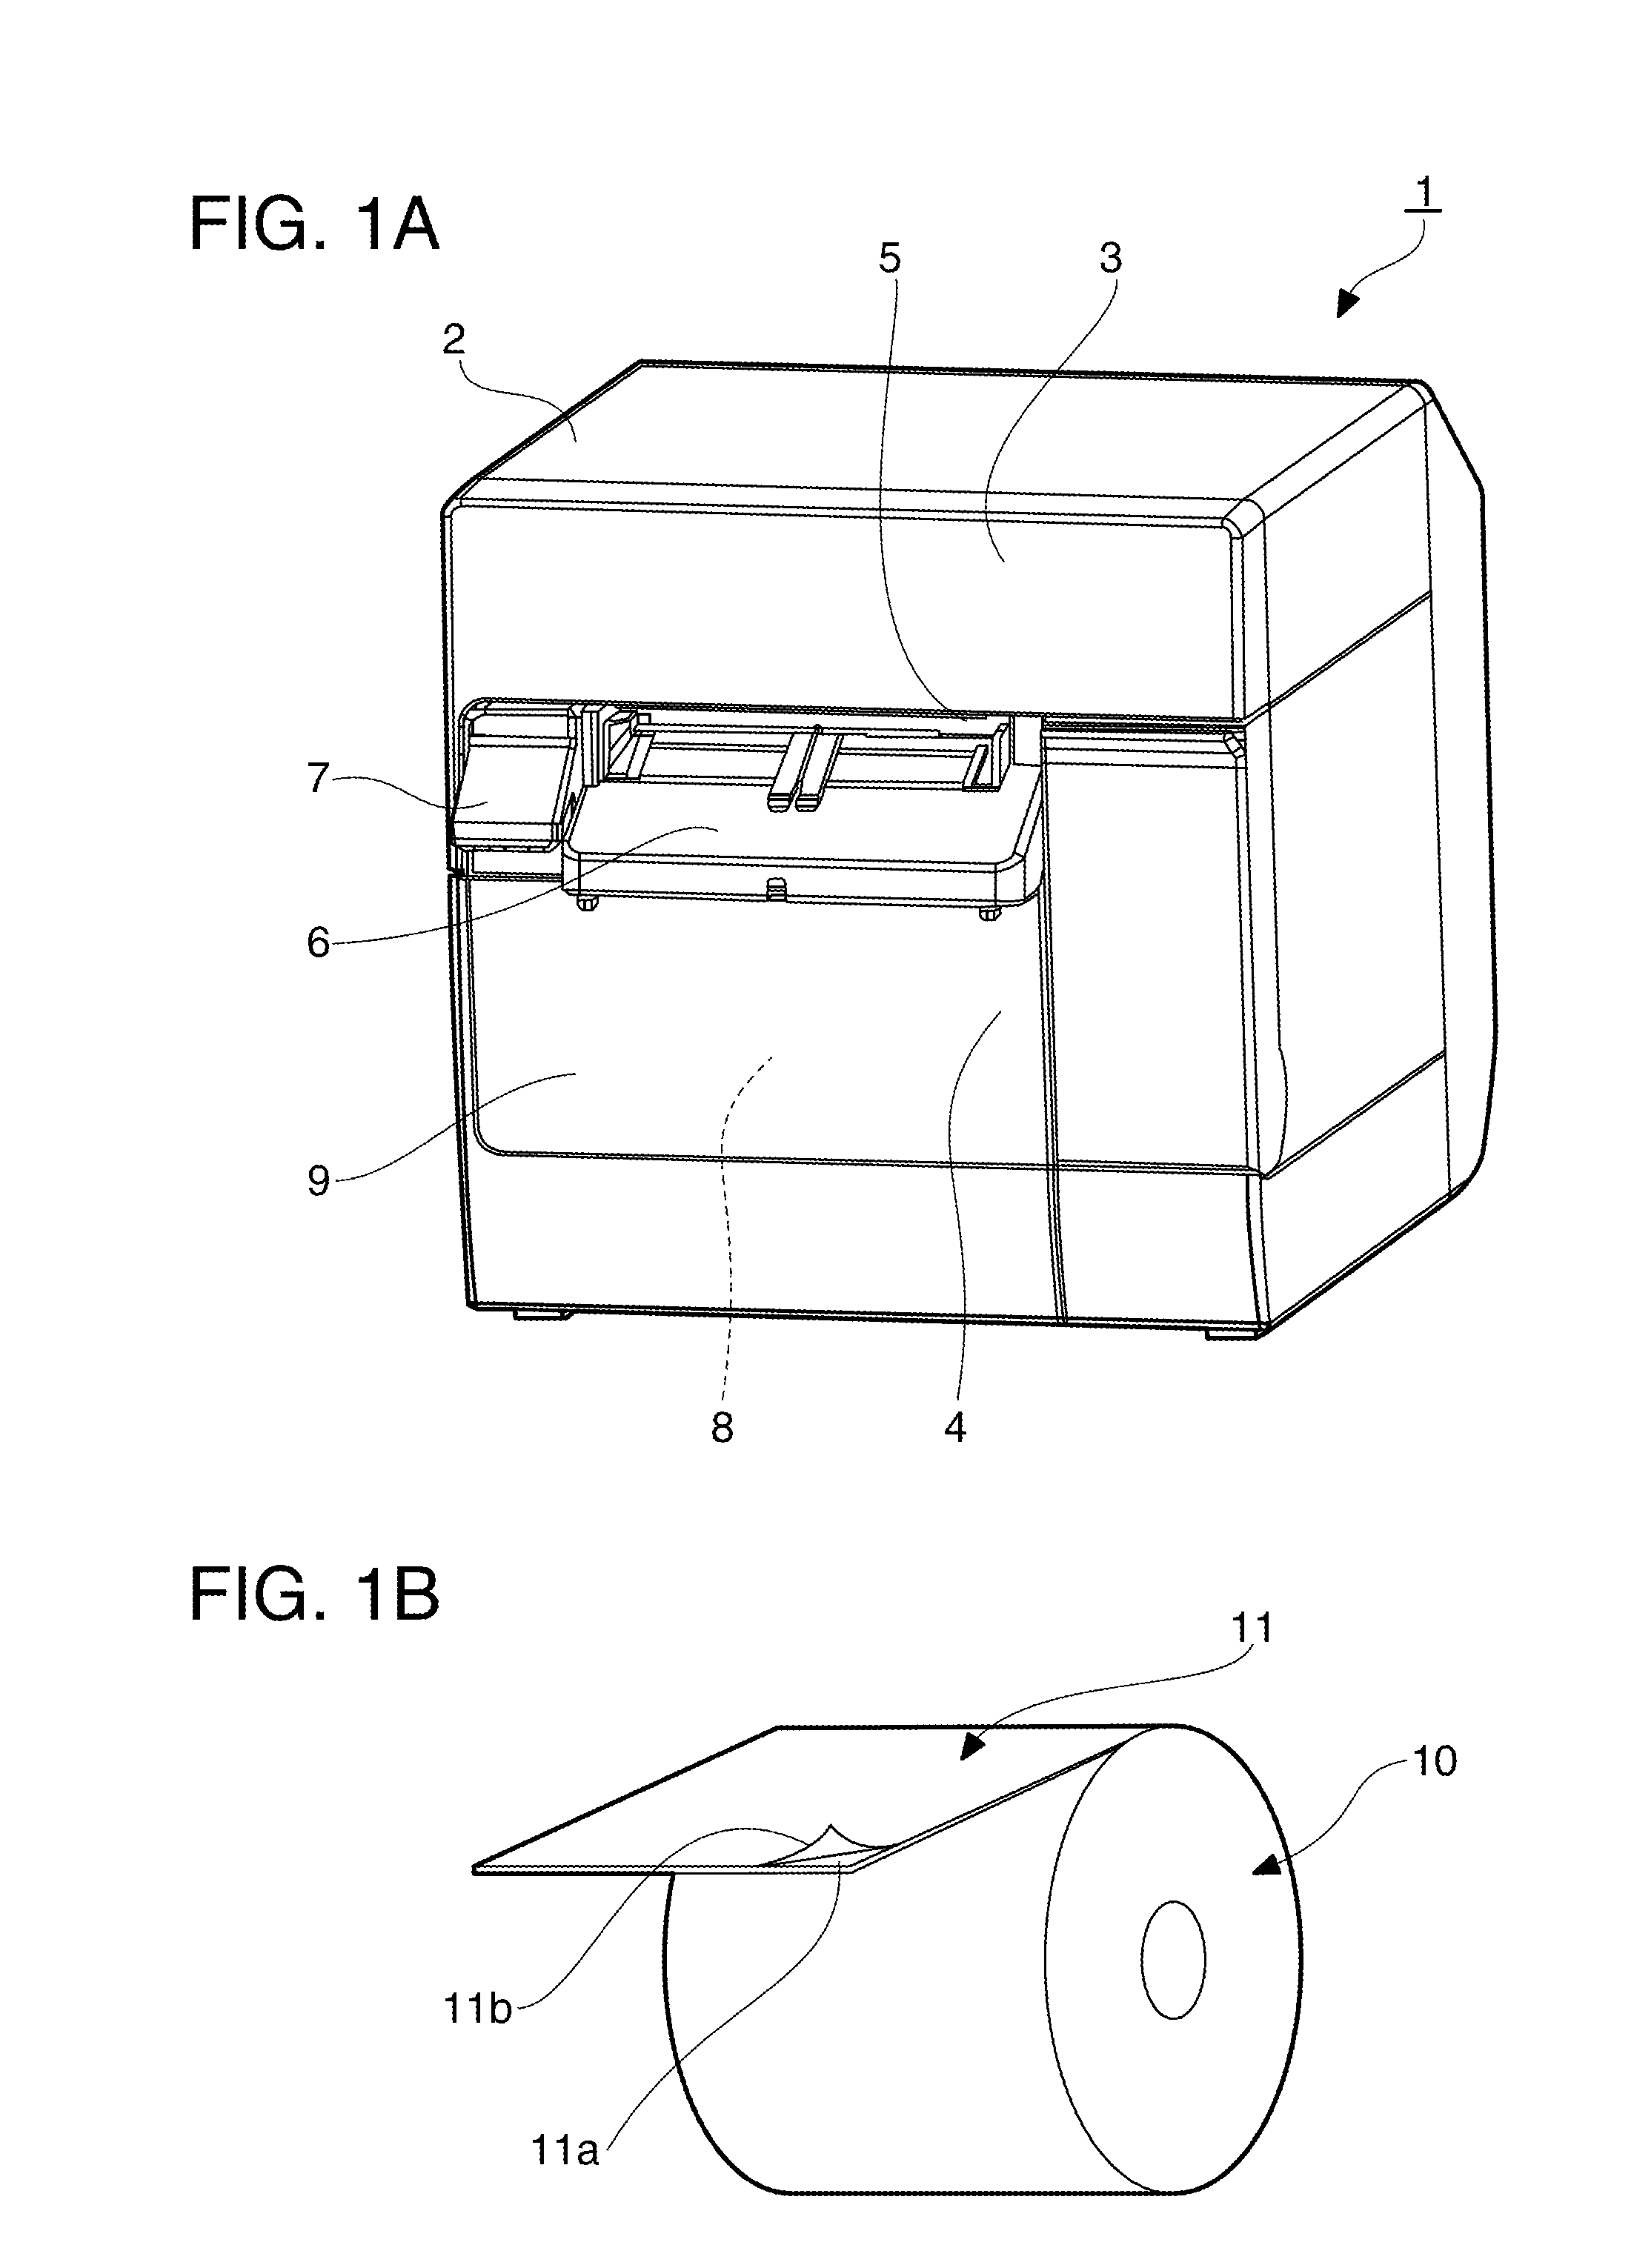 Cutter and printer with cutter